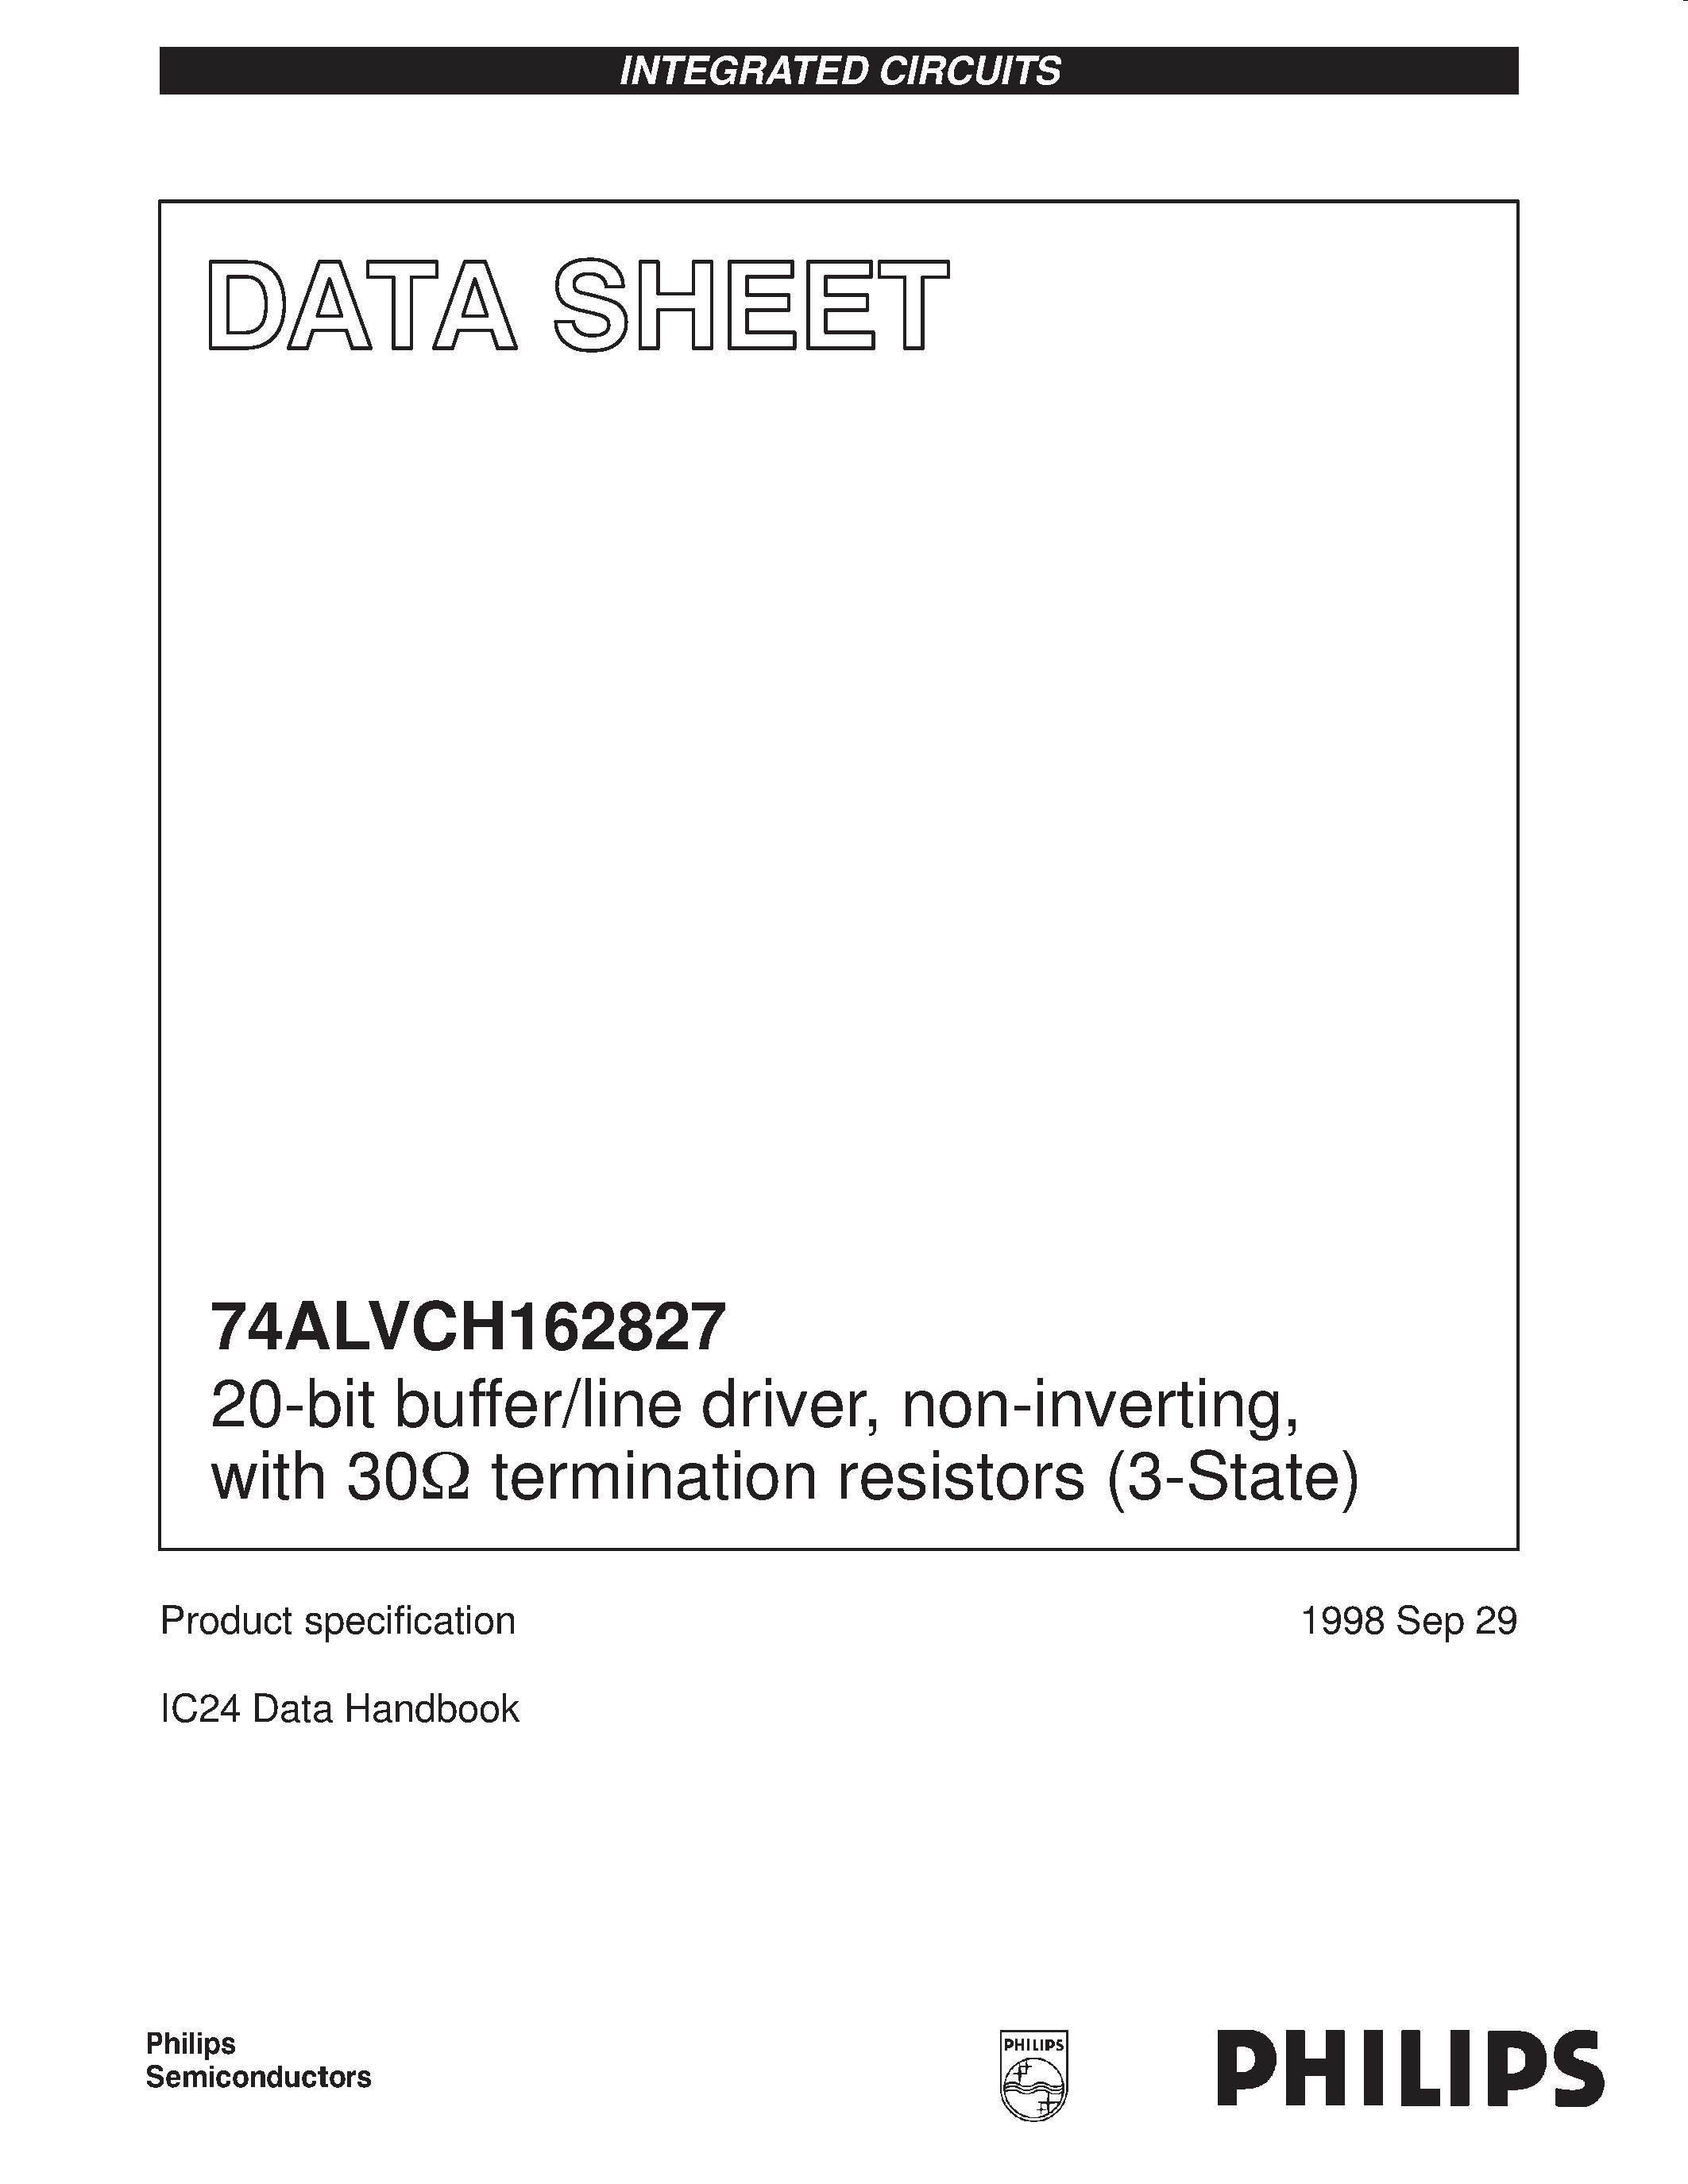 Datasheet 74ALVCH162827 - 20-bit buffer/line driver/ non-inverting/with 30ohm termination resistors (3-State) page 1